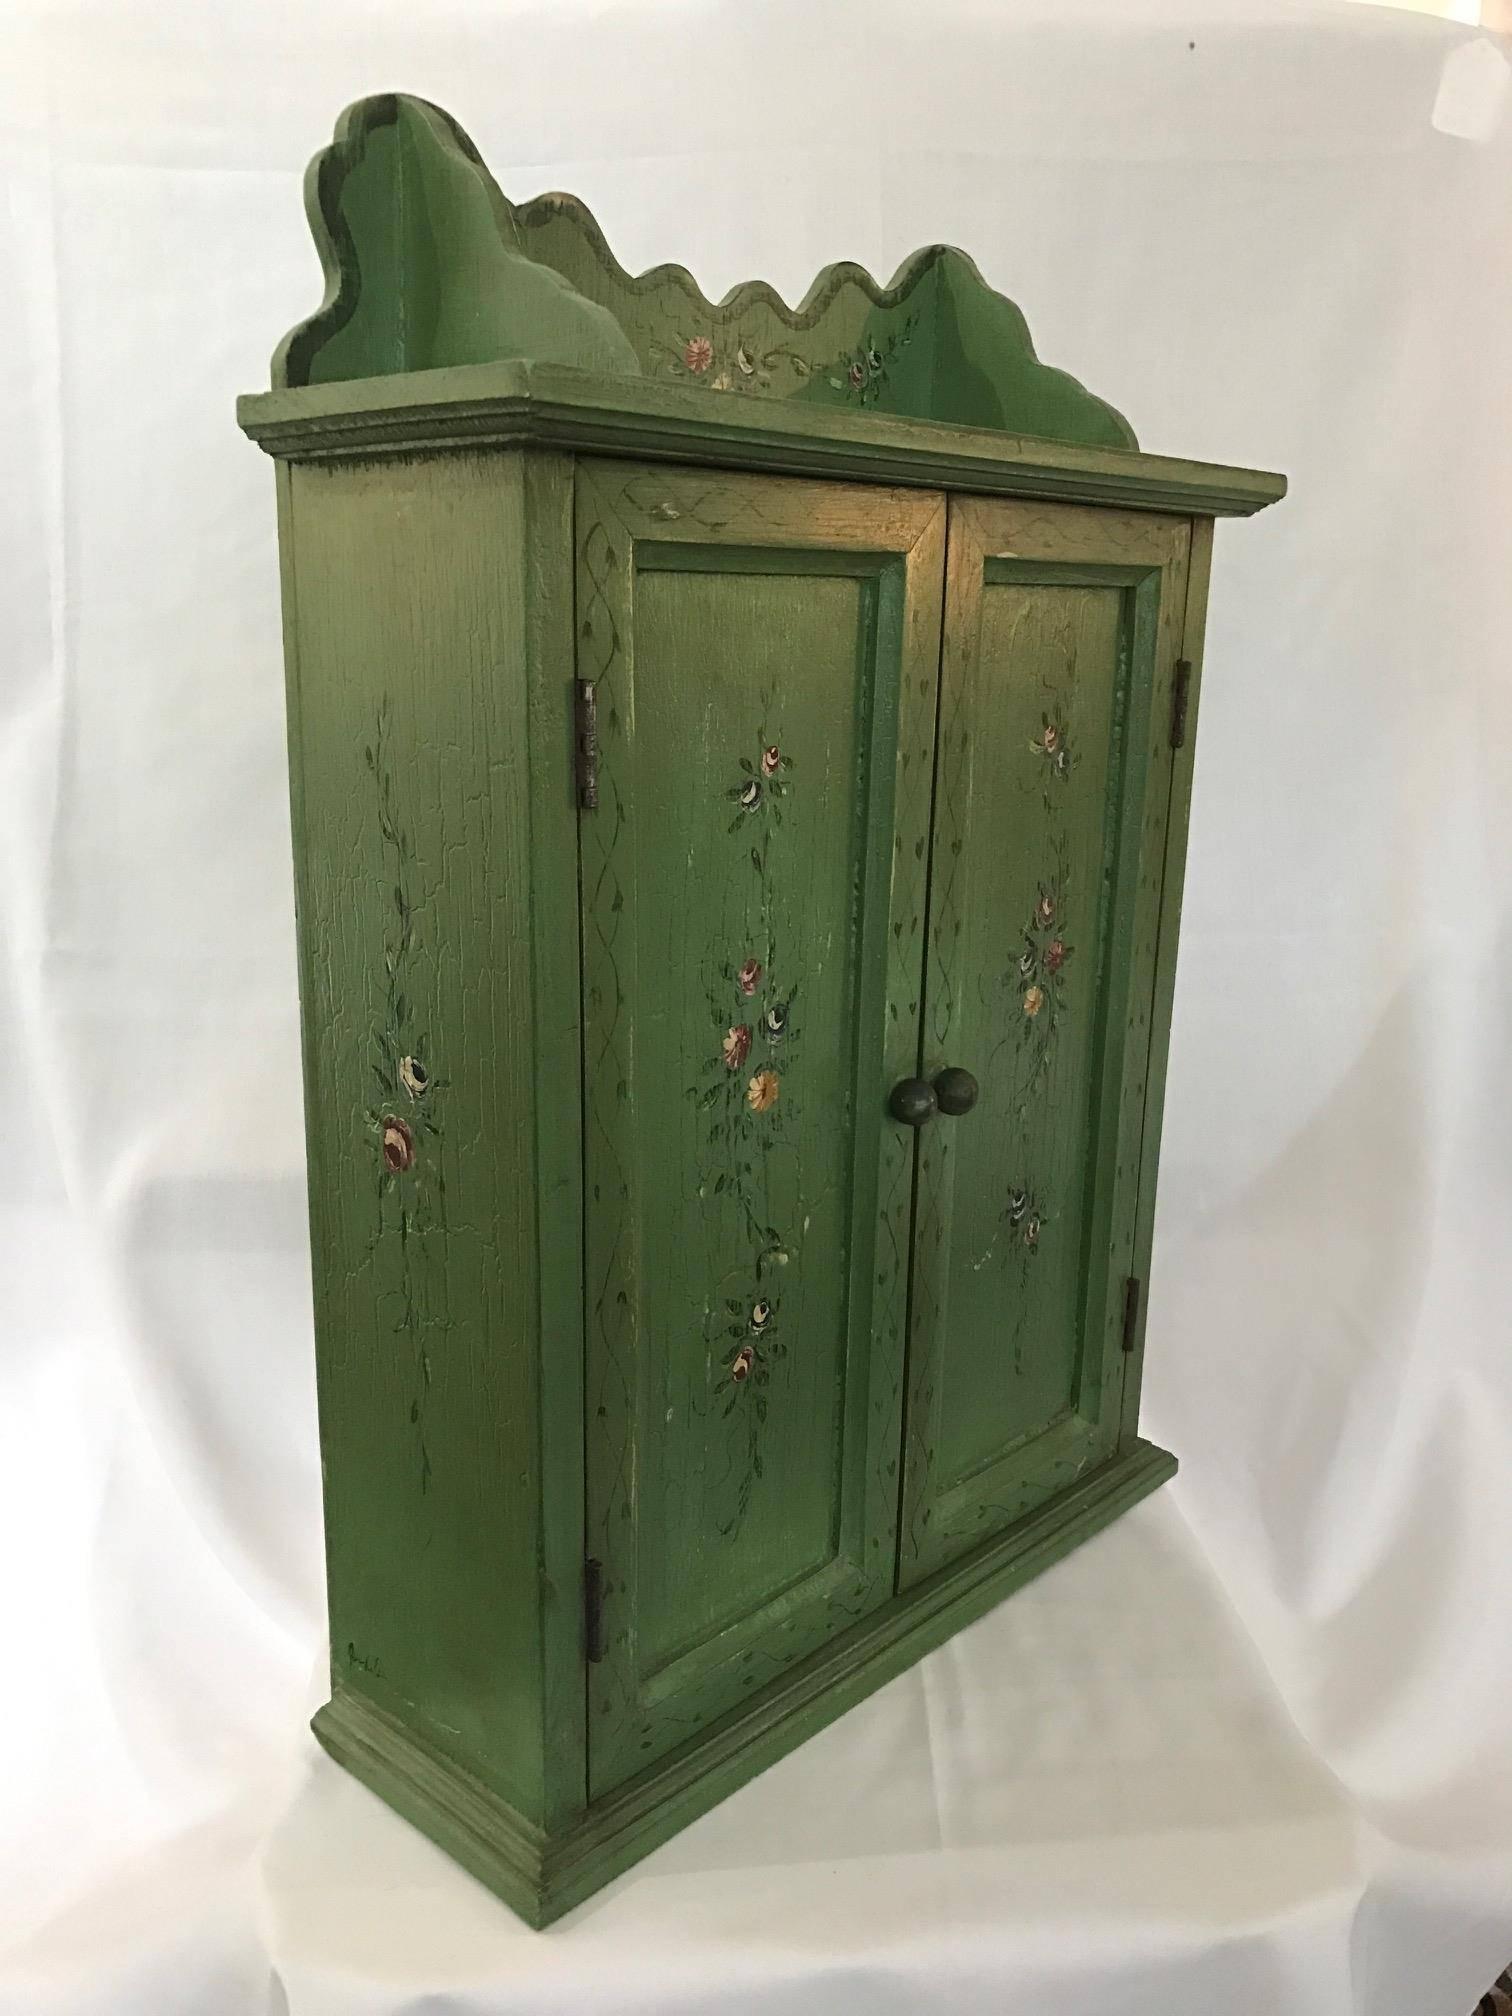 A fantastic signed French revival Giverny garden green cupboard/cabinet hand-painted petite flora's and vines.

 Monet May have found this piece just perfect for his Giverny home. Exquisite scalloped edges and beautiful hand painted craftsmanship